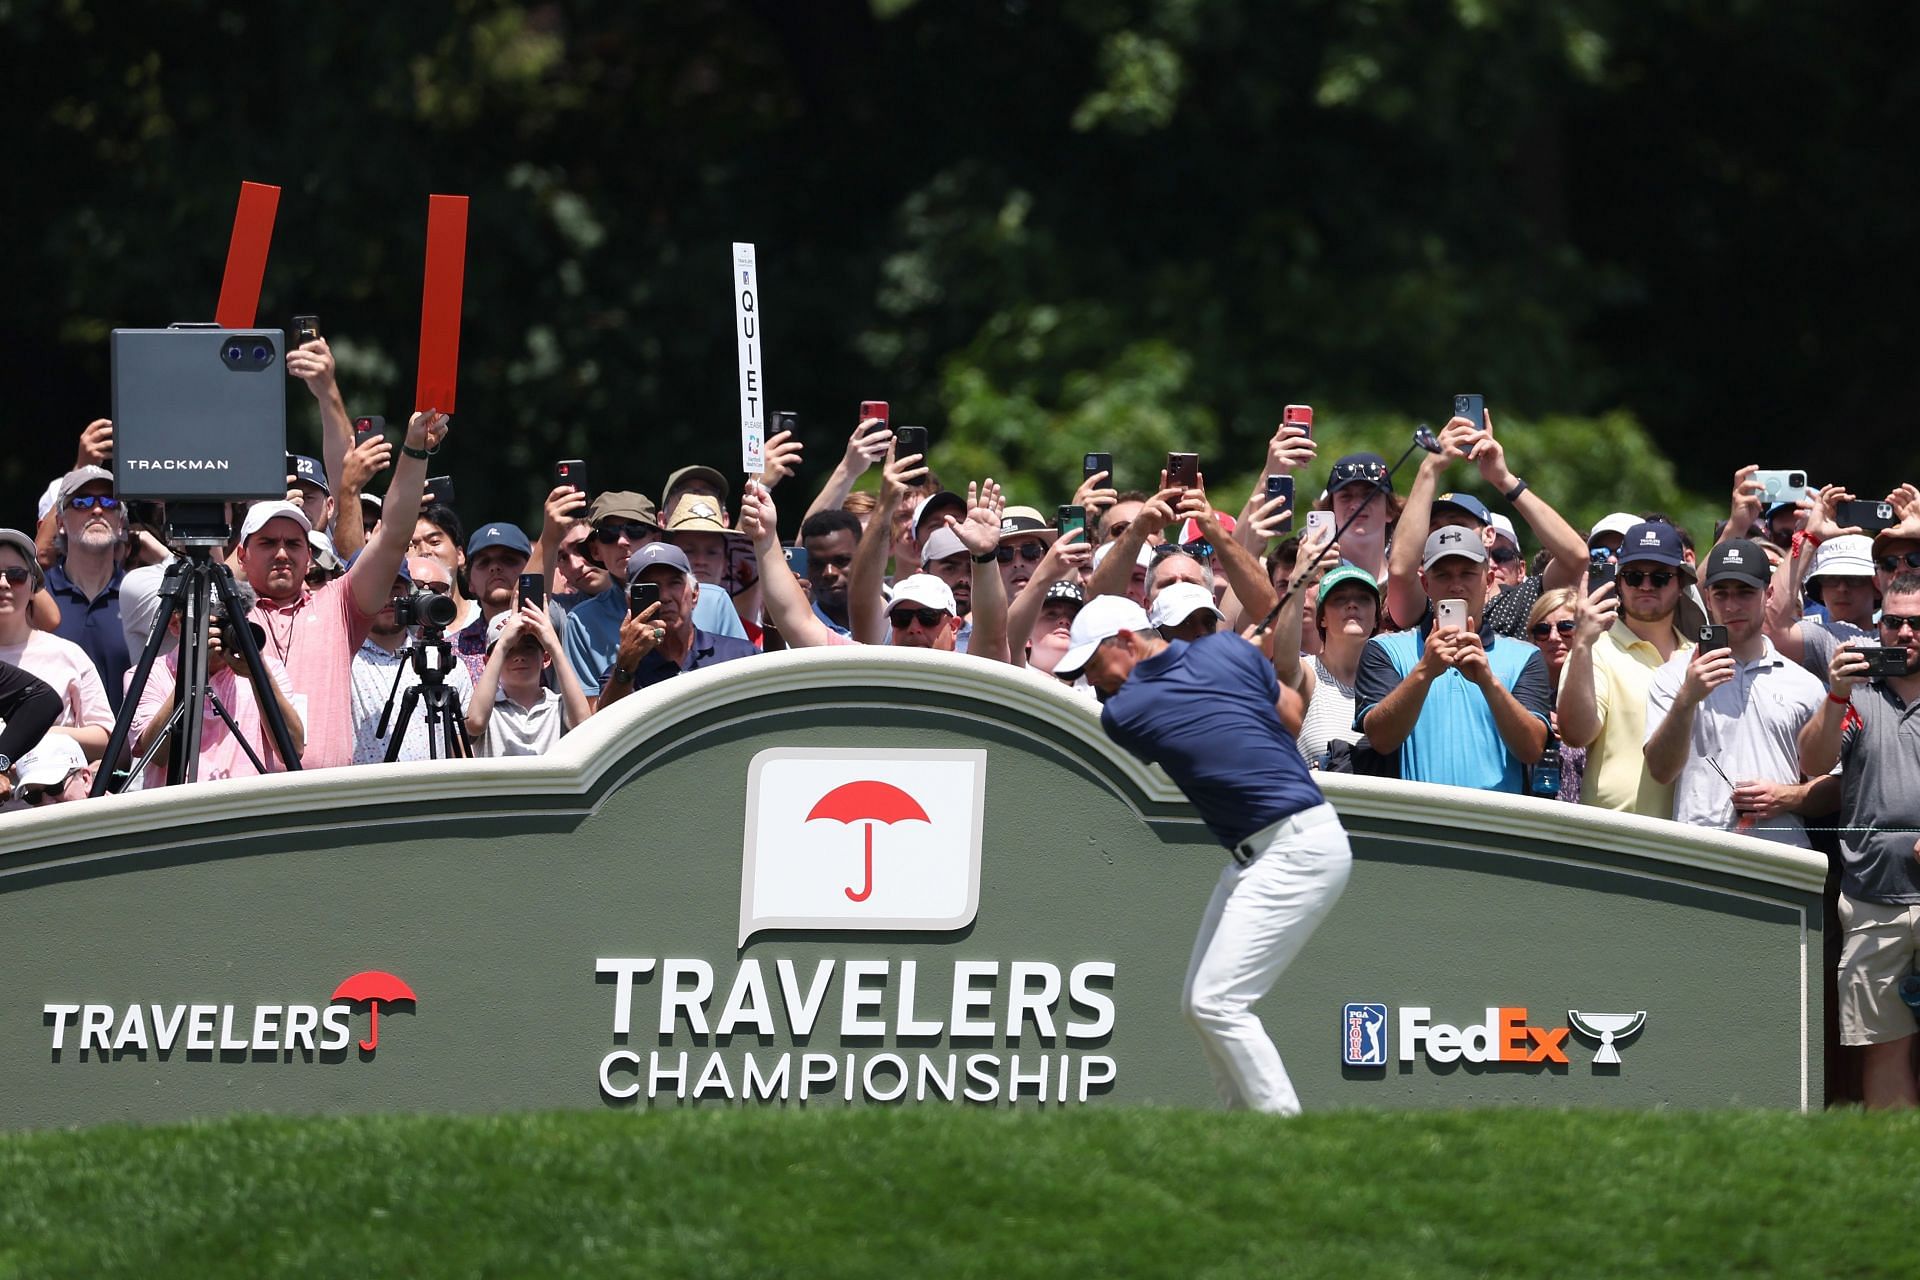 Rory McIlroy plays his shot from the first tee during the final round of the Travelers Championship at TPC River Highlands